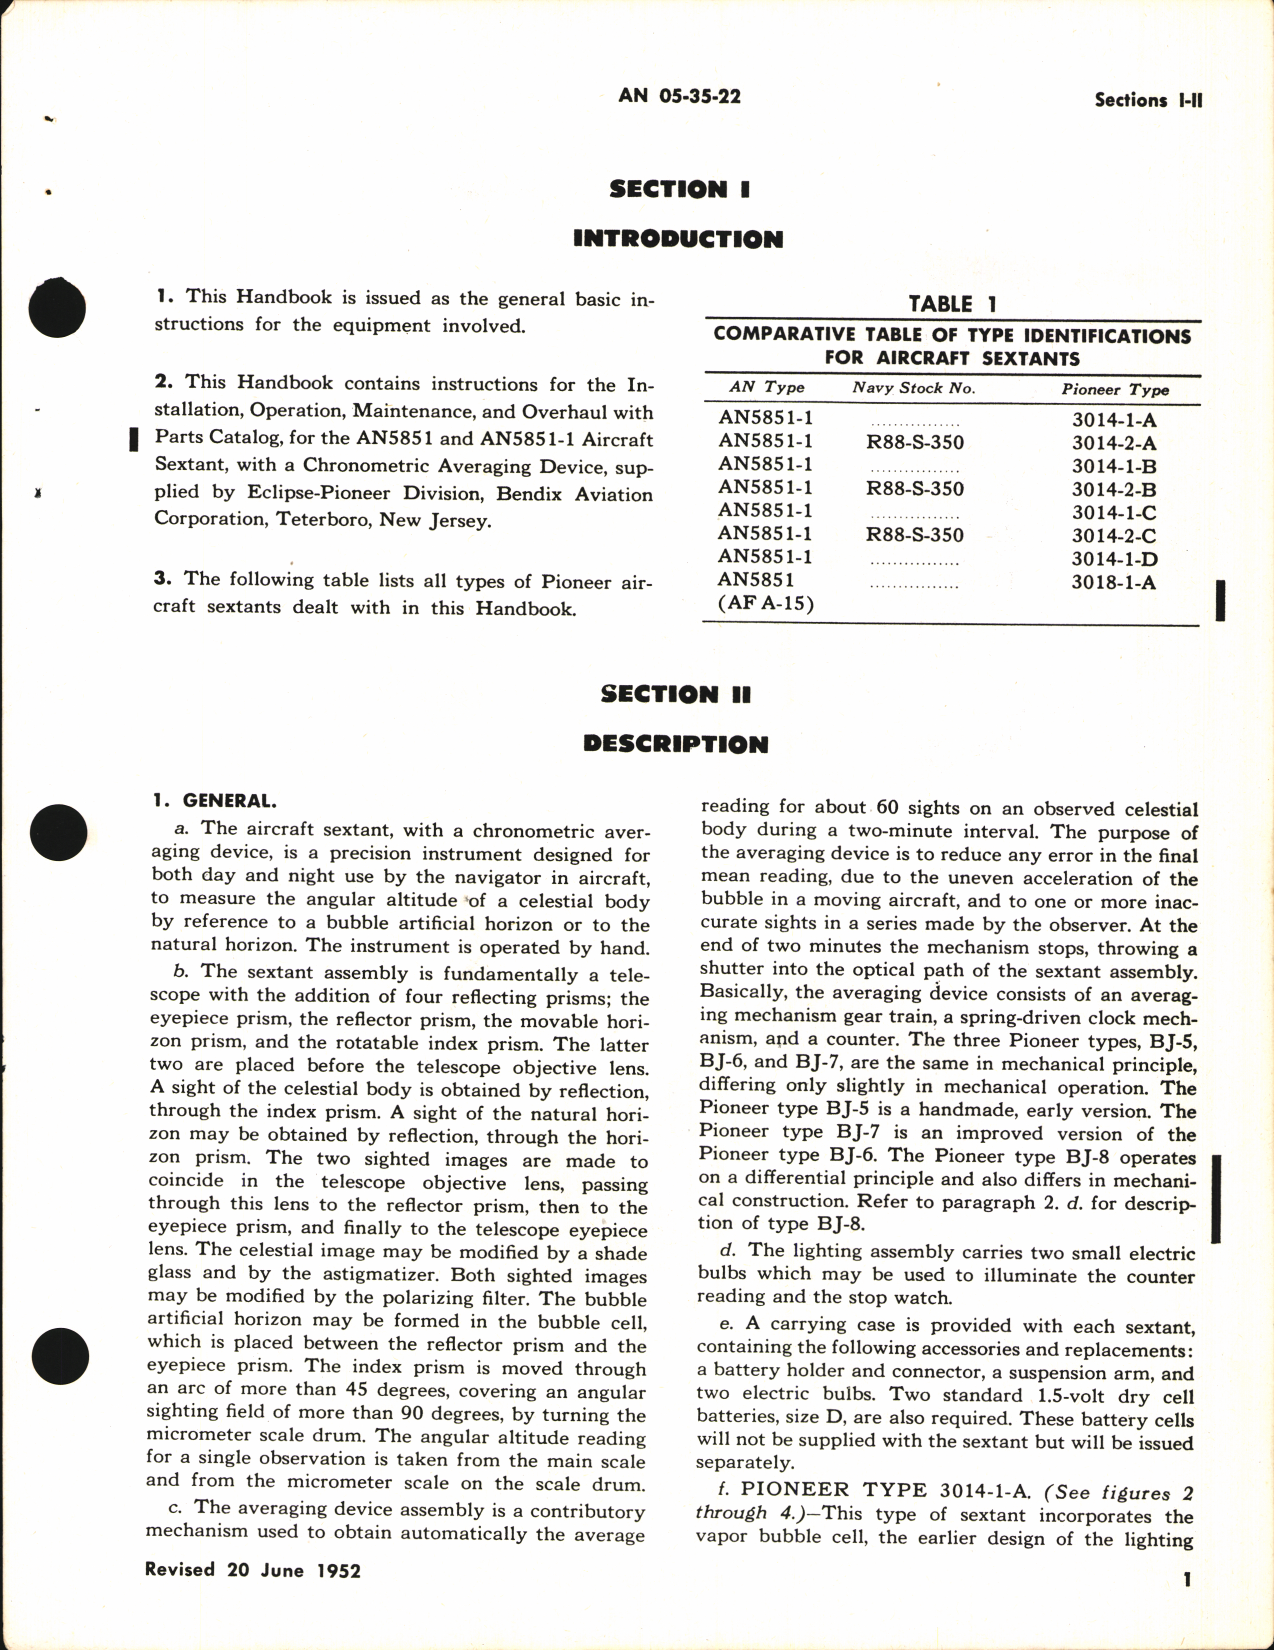 Sample page 5 from AirCorps Library document: Operation, Service, & Overhaul Instructions with Parts Catalog for AN5851-1 Aircraft Sextant